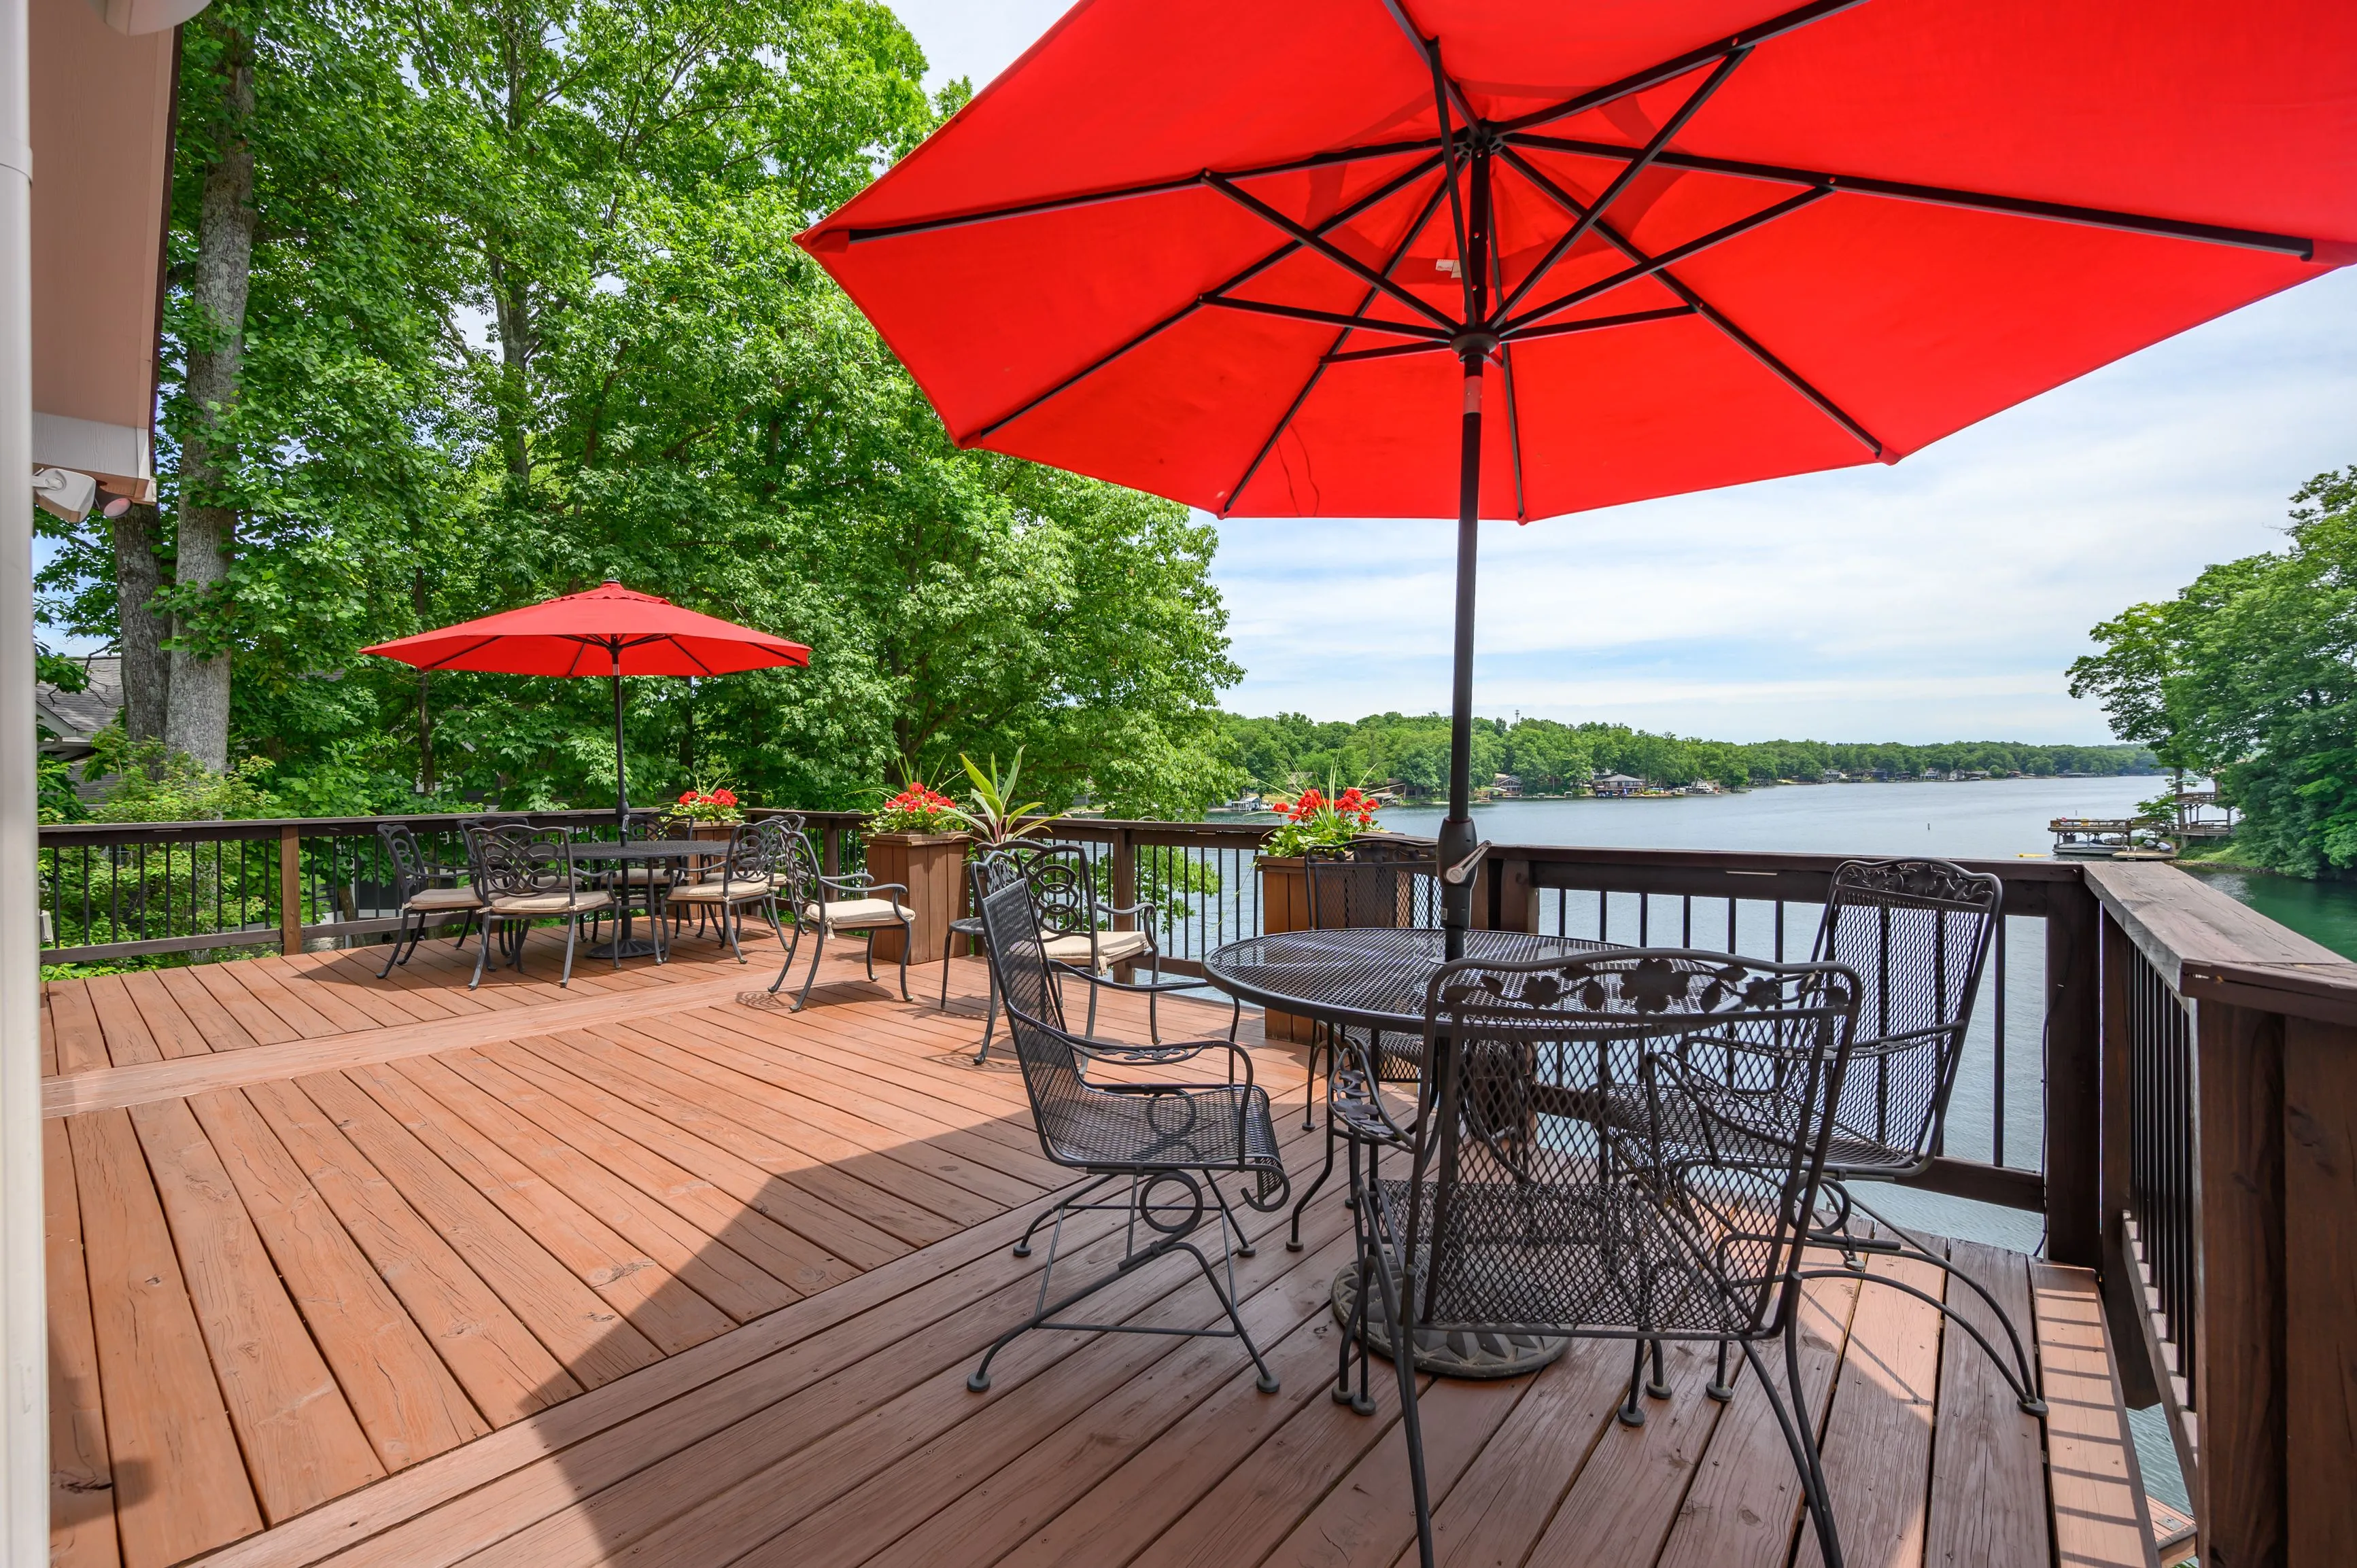 Lakeside wooden deck with outdoor furniture and a red umbrella, surrounded by lush greenery.